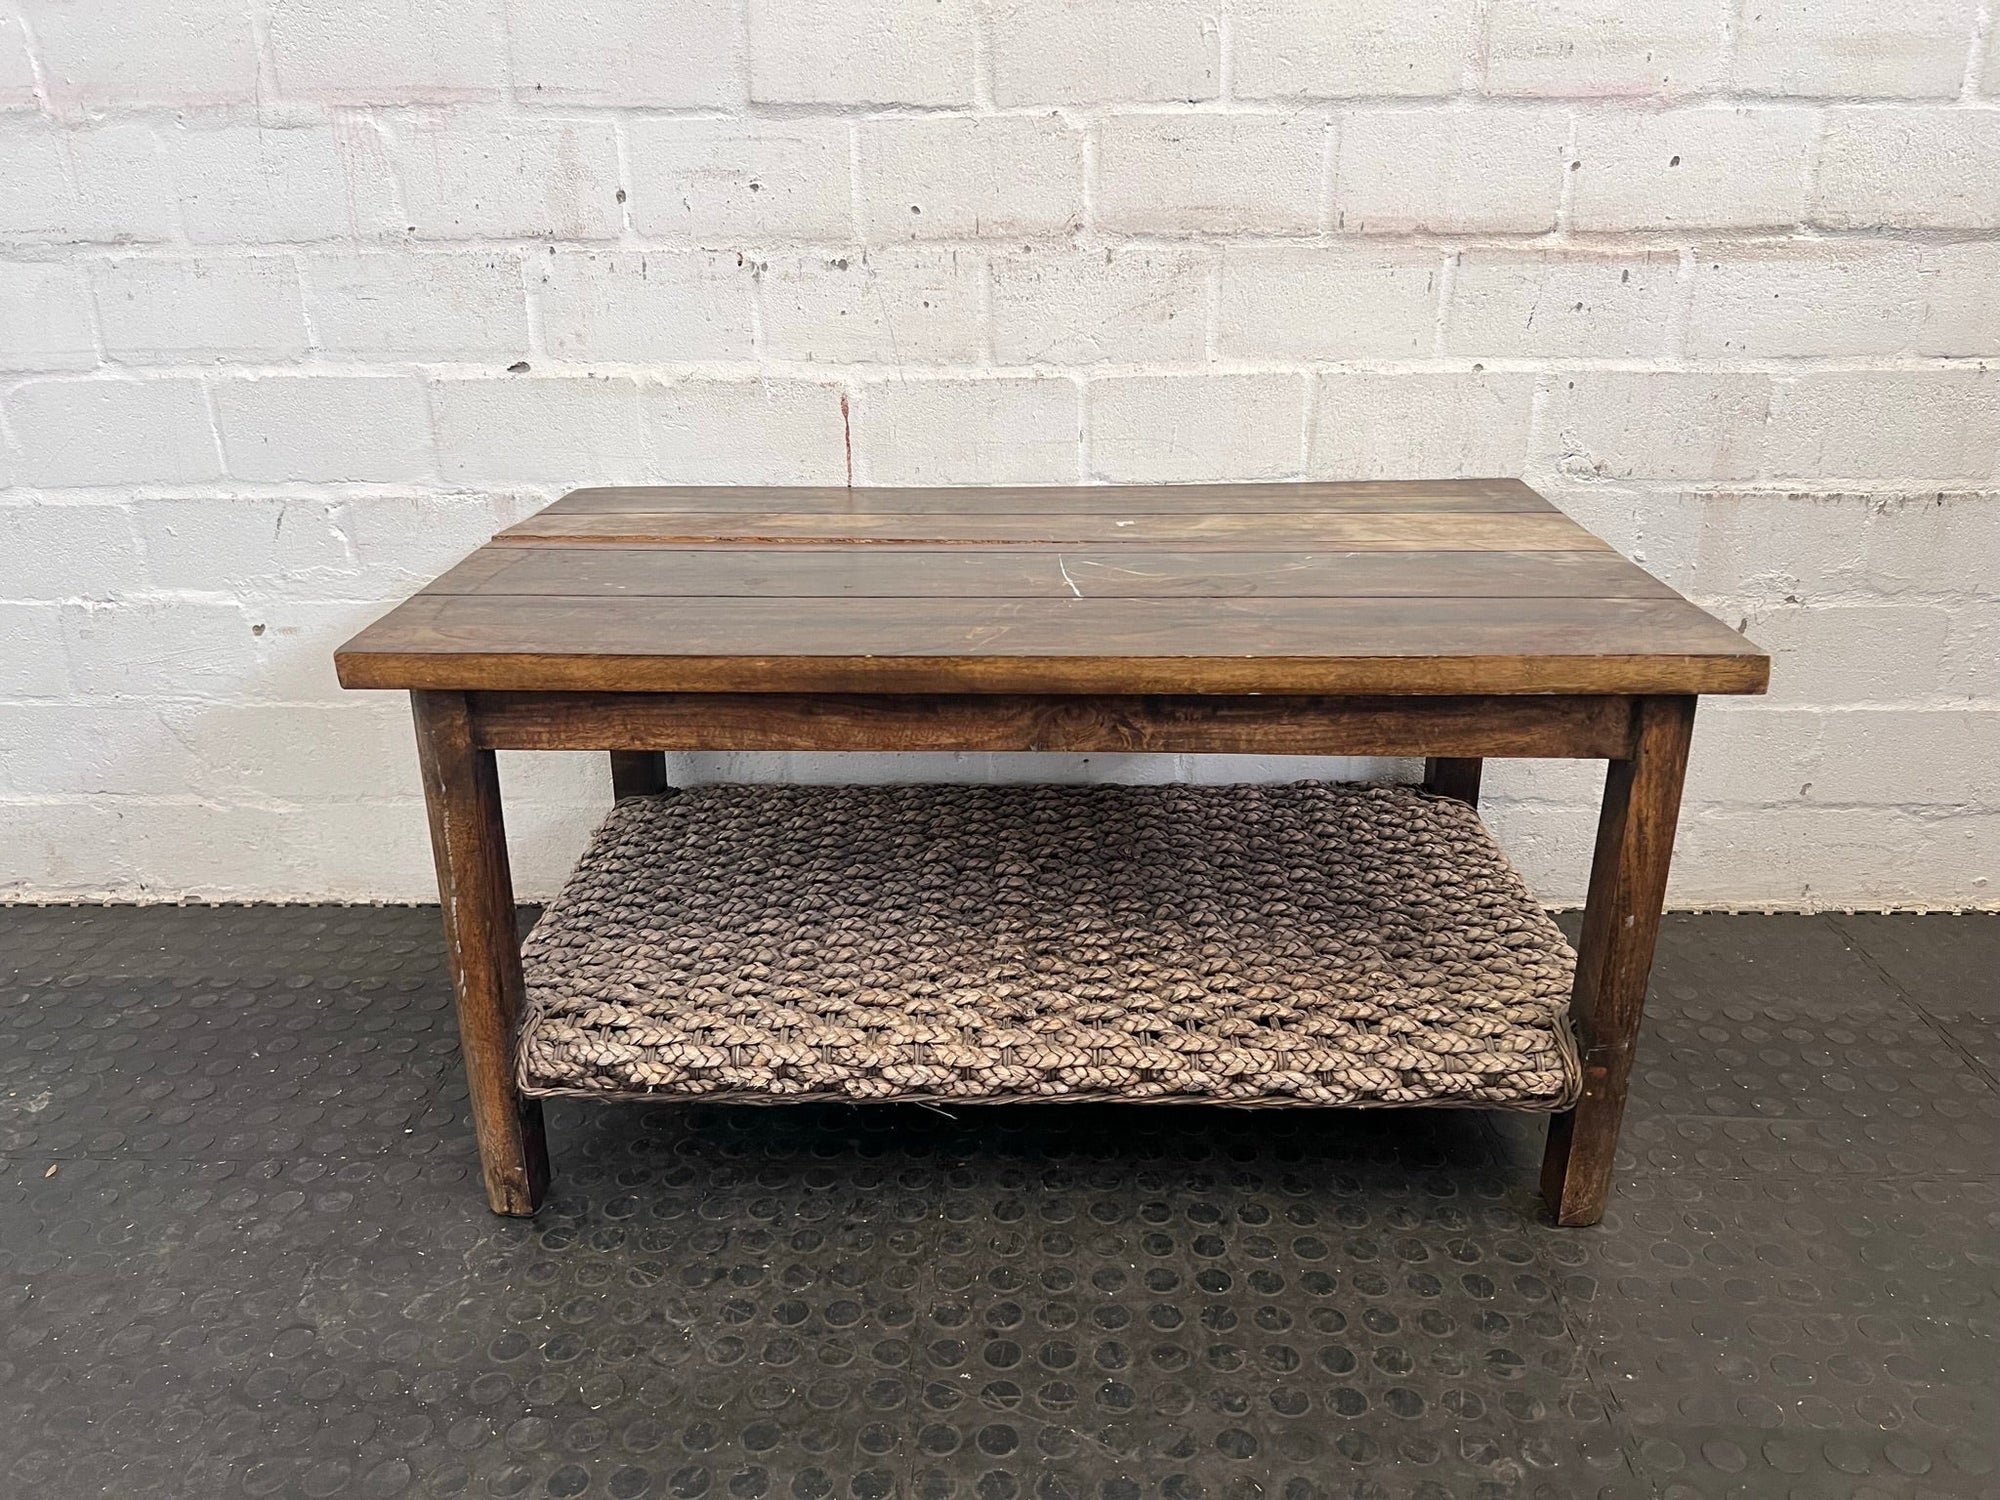 Wooden Rustic 2 Tier Coffee Table - REDUCED